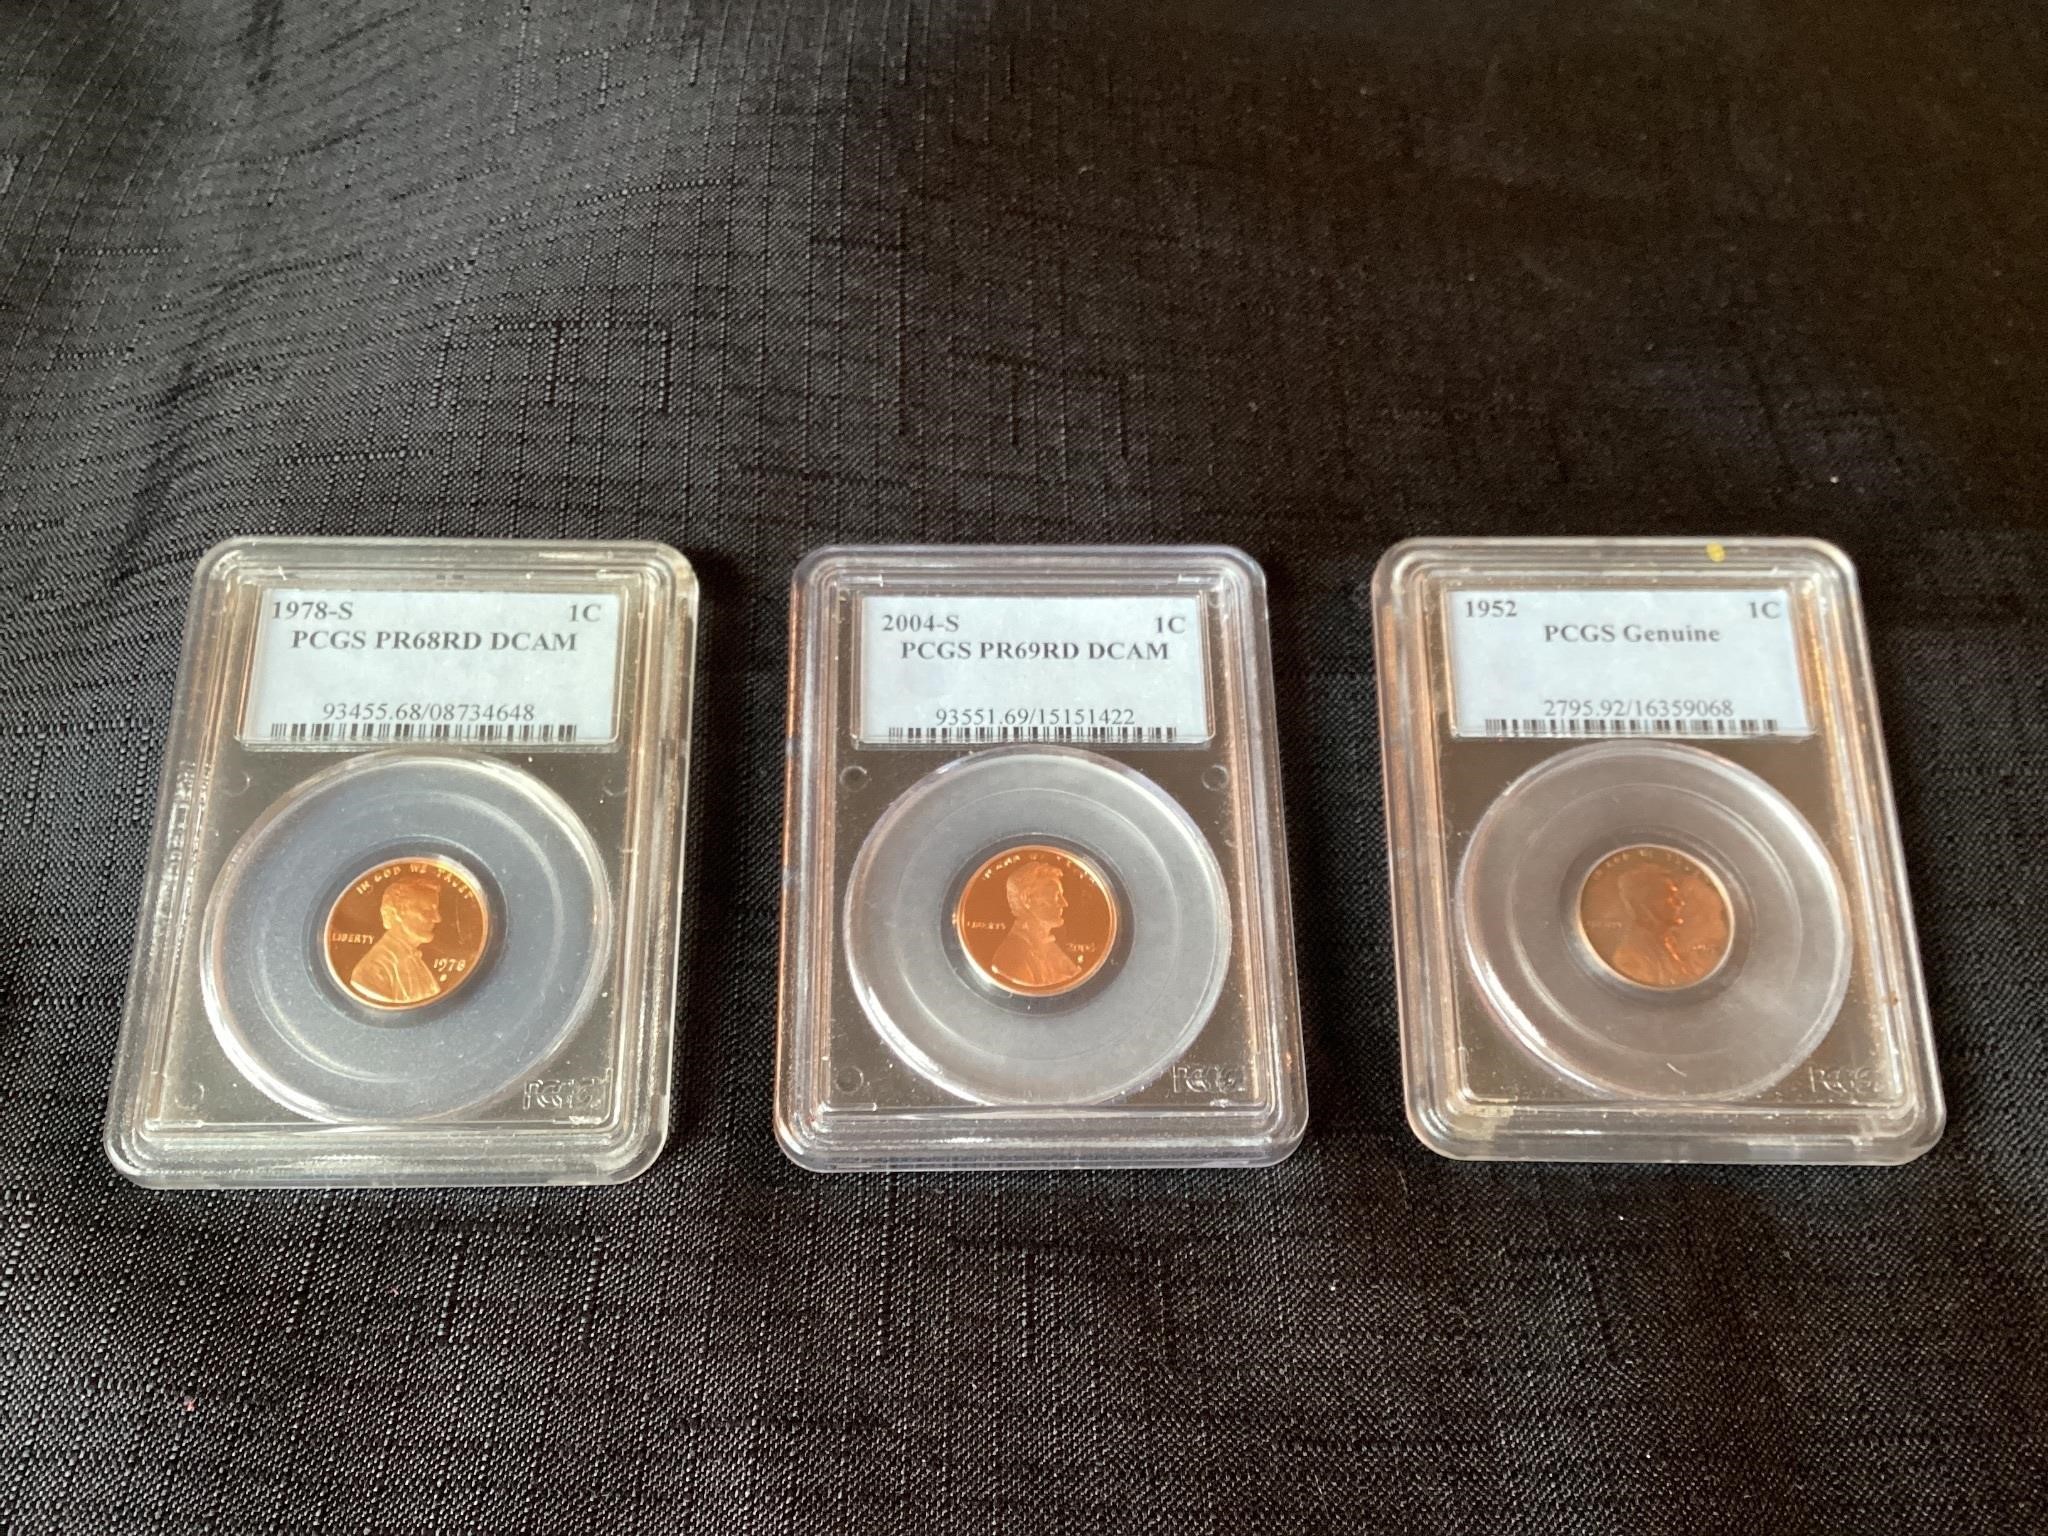 3 1 cent Graded Coins 1952, 1978S  and 2004S